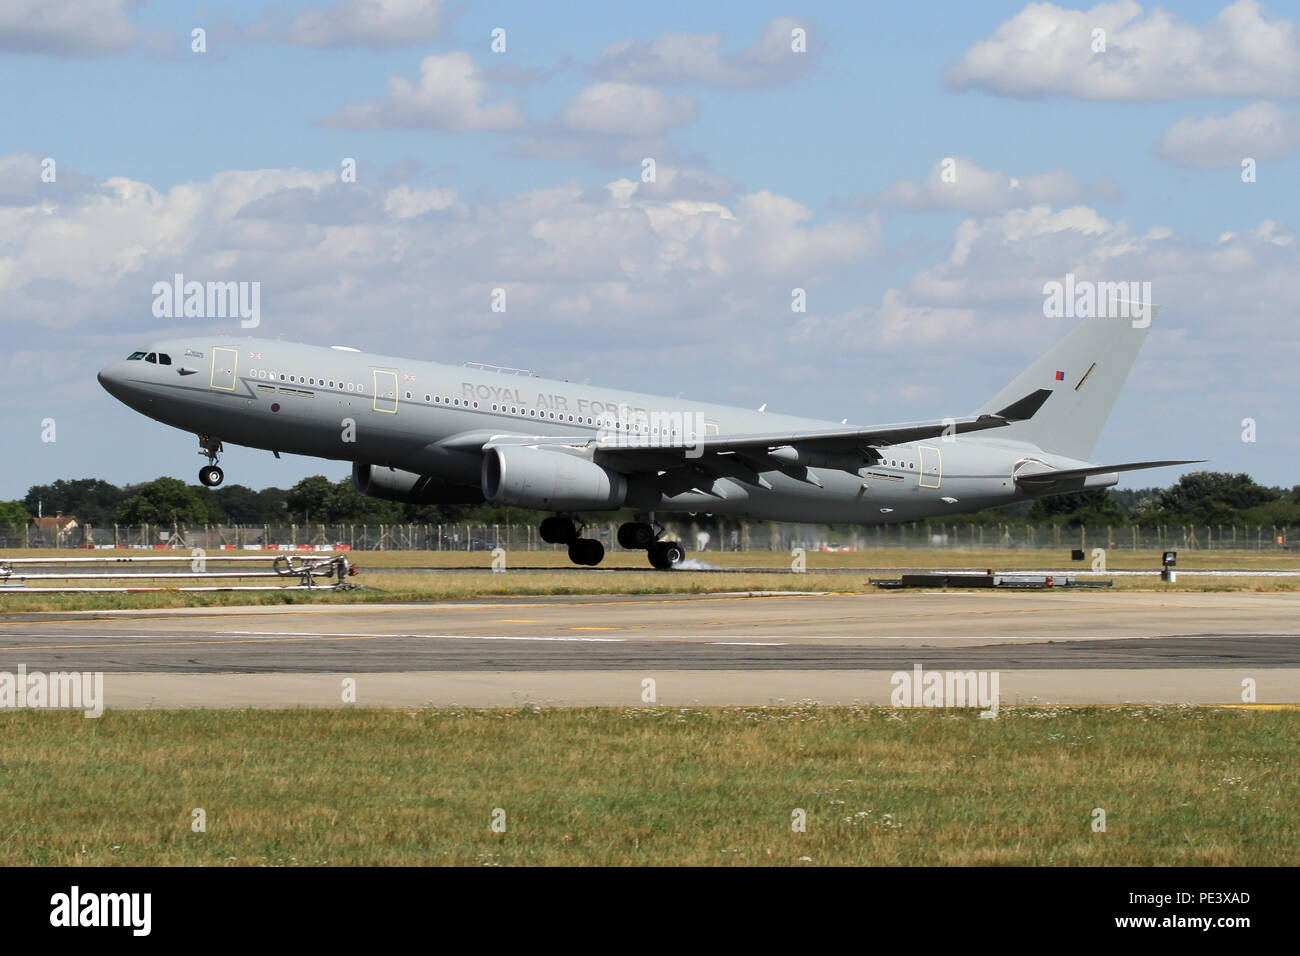 Royal Air Force A330 Voyager air refuelling/cargo aircraft on approach to RAF Mildenhall. Stock Photo